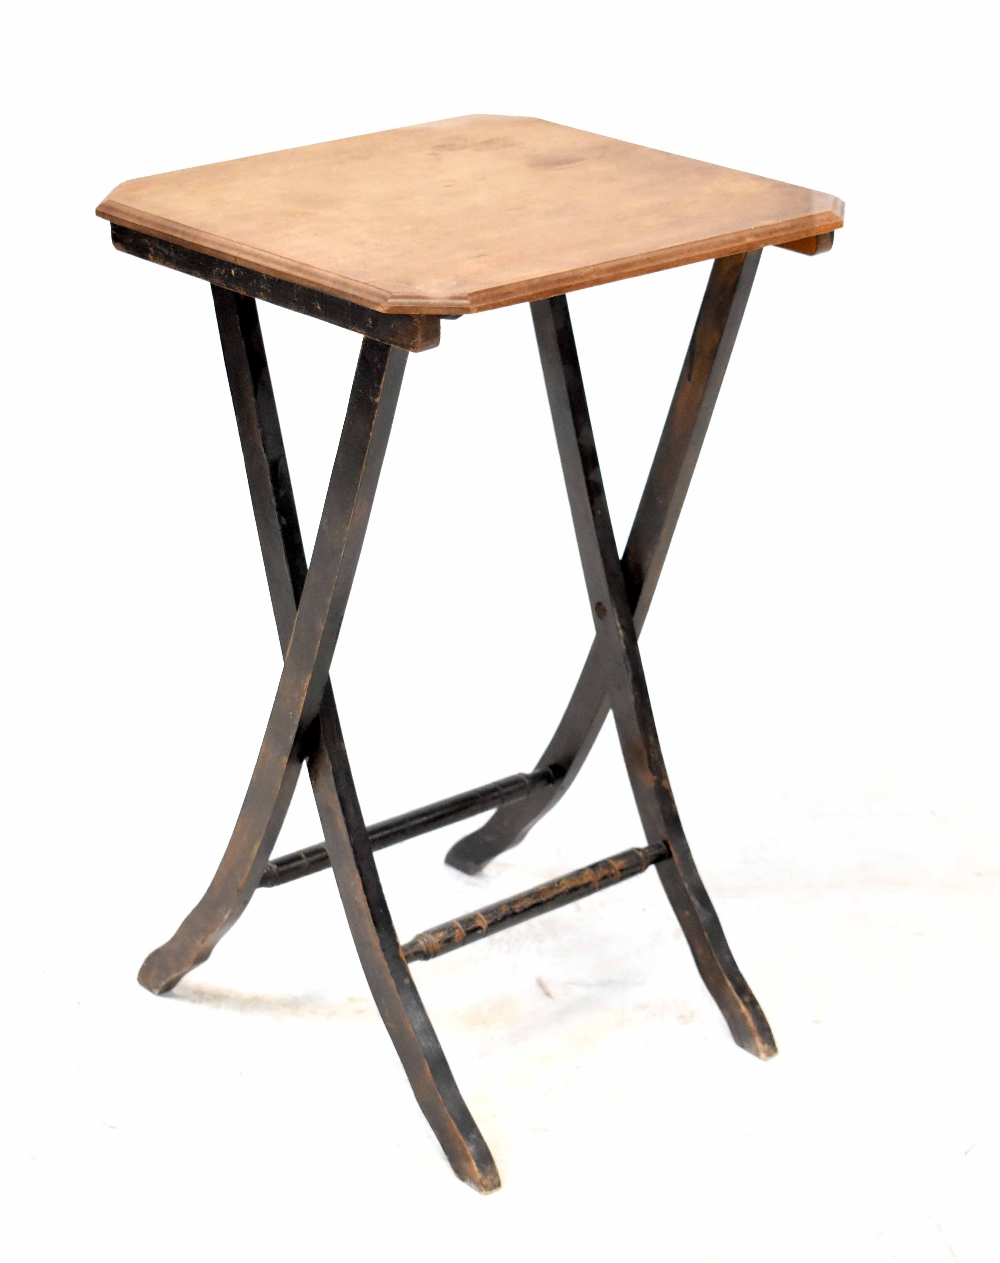 An early 20th century folding table with ebonised base, 60 x 38 x 38cm.